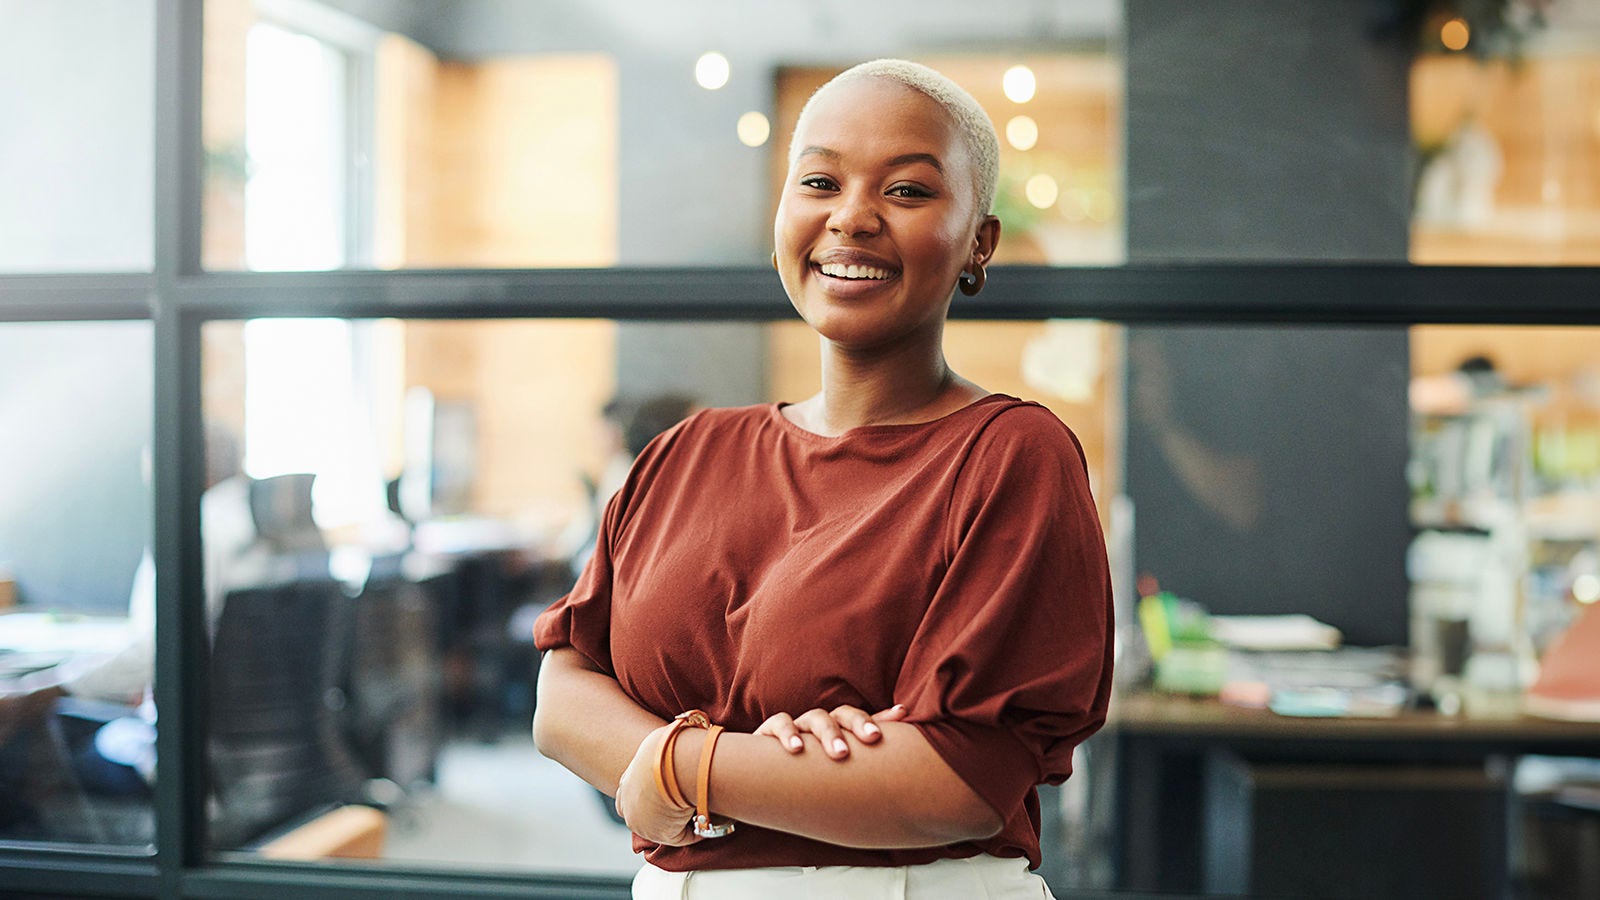 Middle-aged African American female human resources professional smiling and standing confidently in an office setting